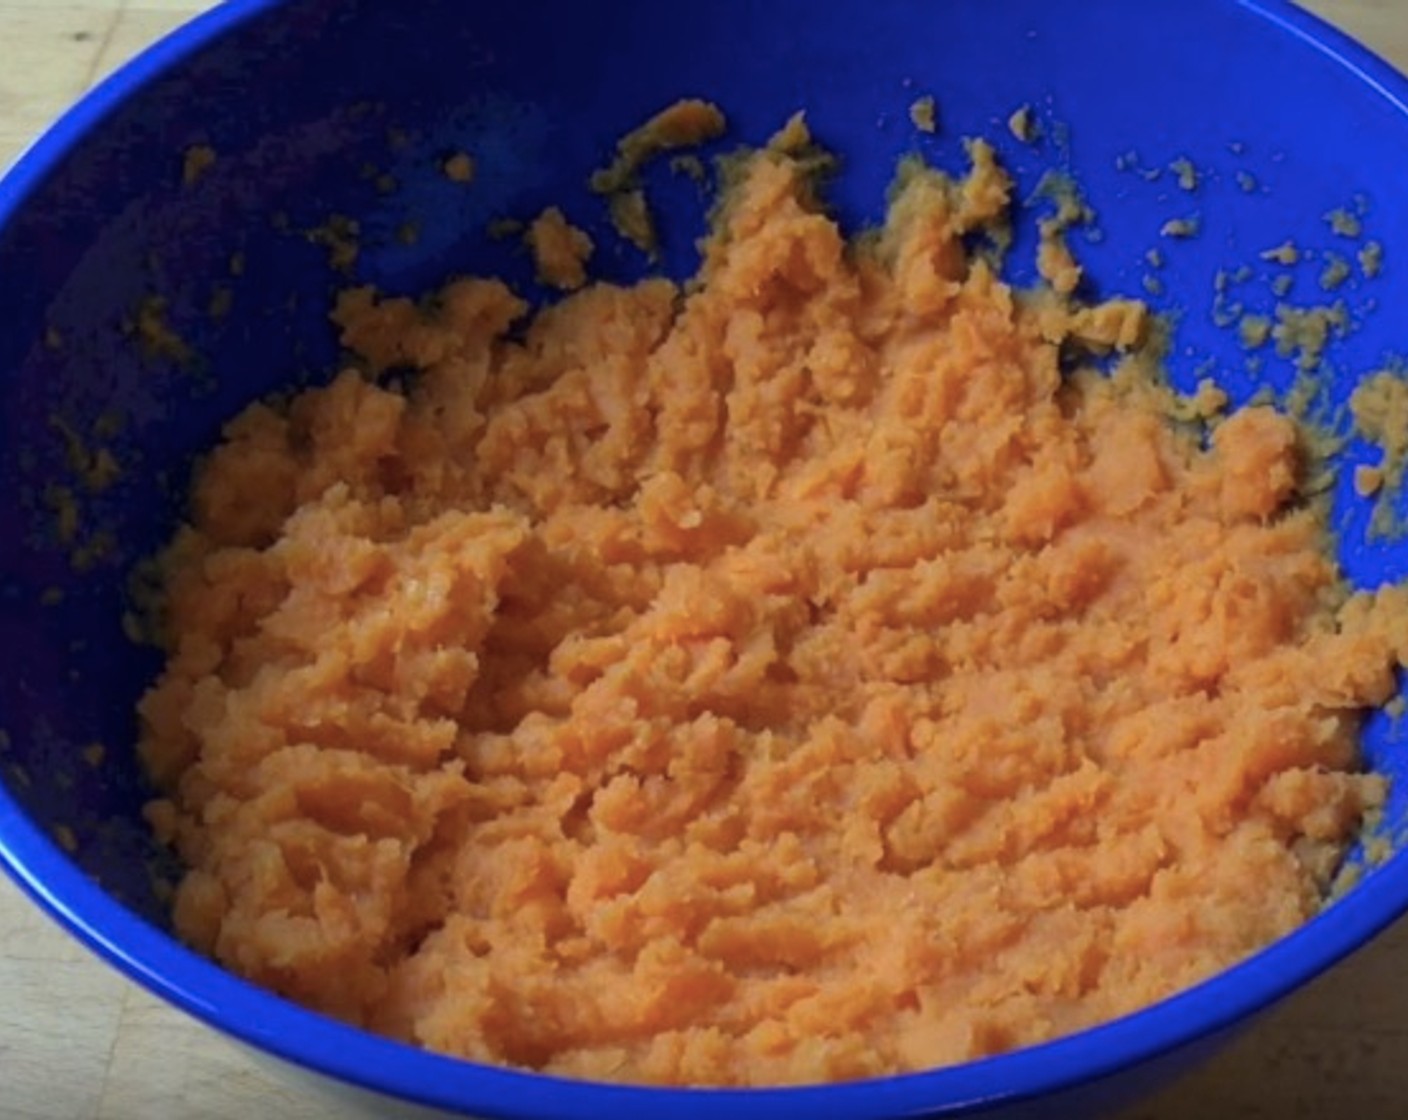 step 9 In a mixing bowl, add Sweet Potatoes (2.2 lb) and 1 tablespoon of chopped butter. Mash until there are no big lumps. Let cool.